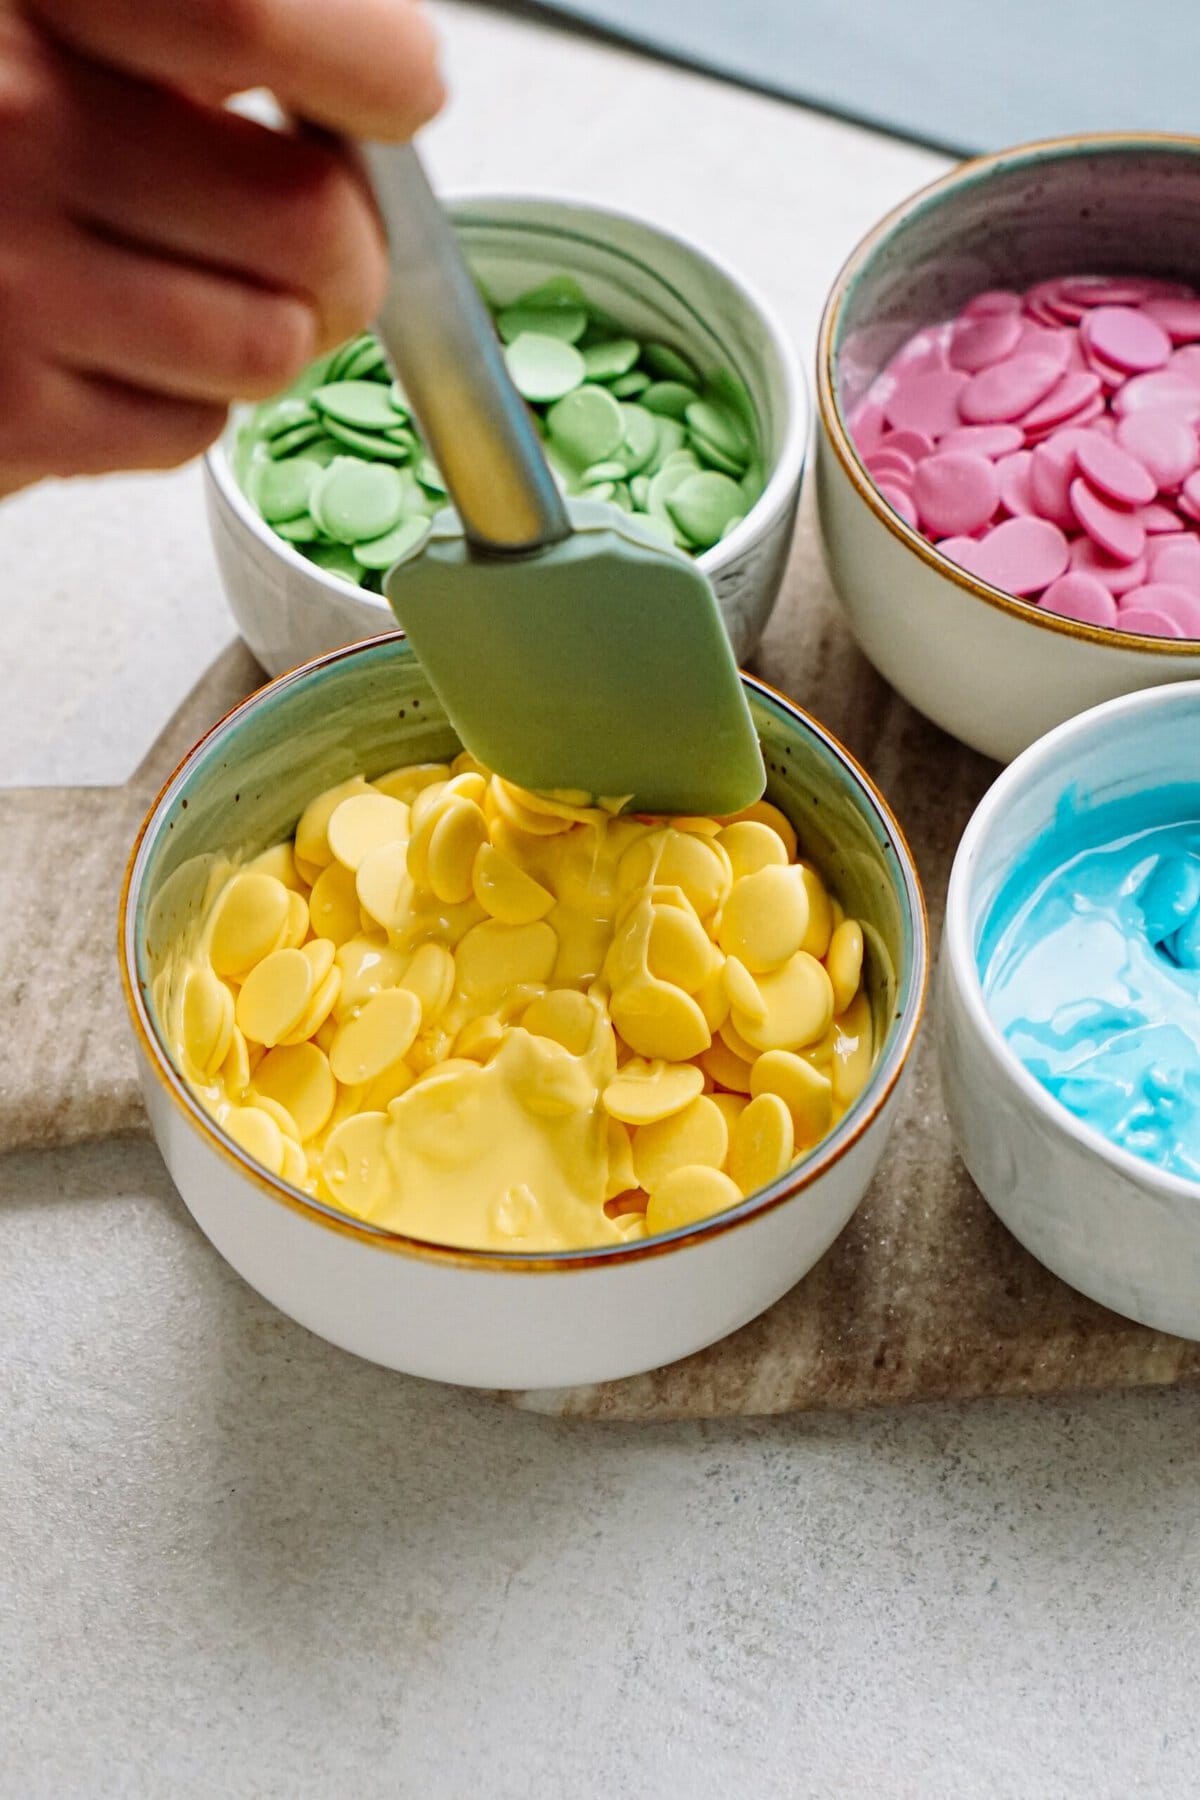 Melting yellow candy melts in a bowl with a spatula, surrounded by other bowls of various colored candy melts.